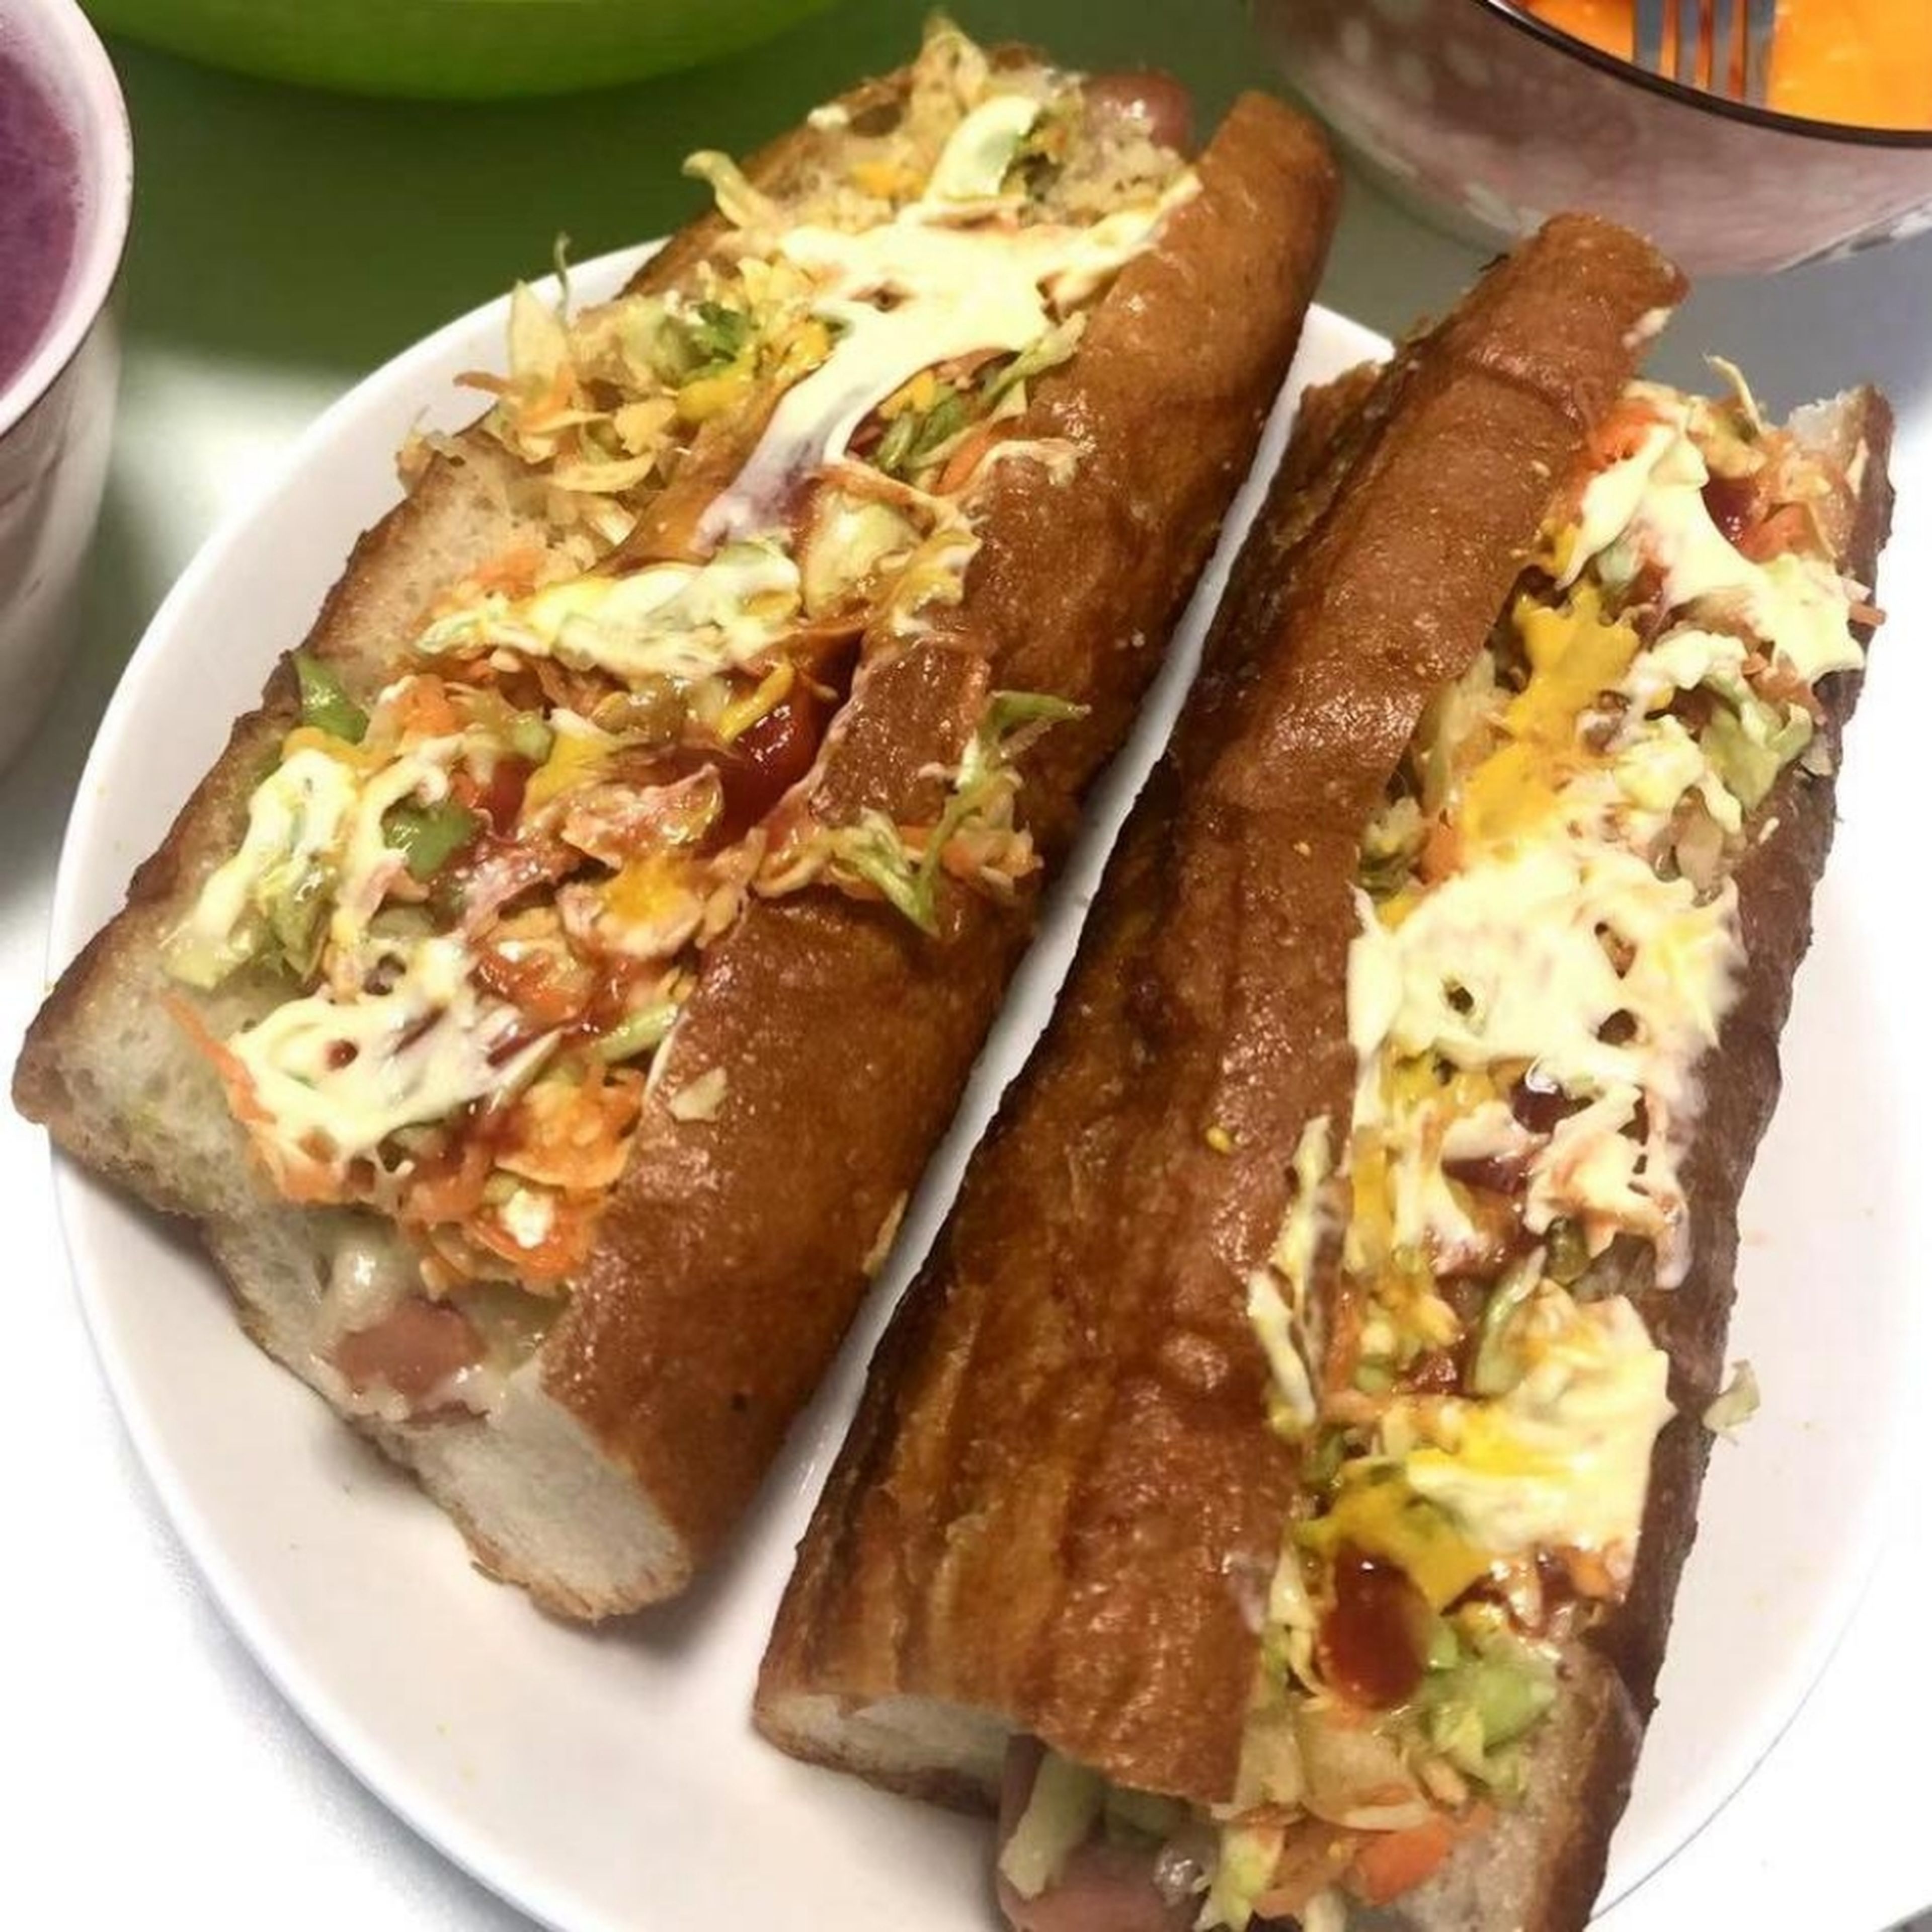 Take out the bread from the microwave, on top of the melted cheese add a layer of crushed potato chips, subsequently add a layer of the salad and lastly finish by covering the hotdog with mayonnaise, ketchup and mustard. Serve immediately and enjoy with your favorite drink and favorite people.